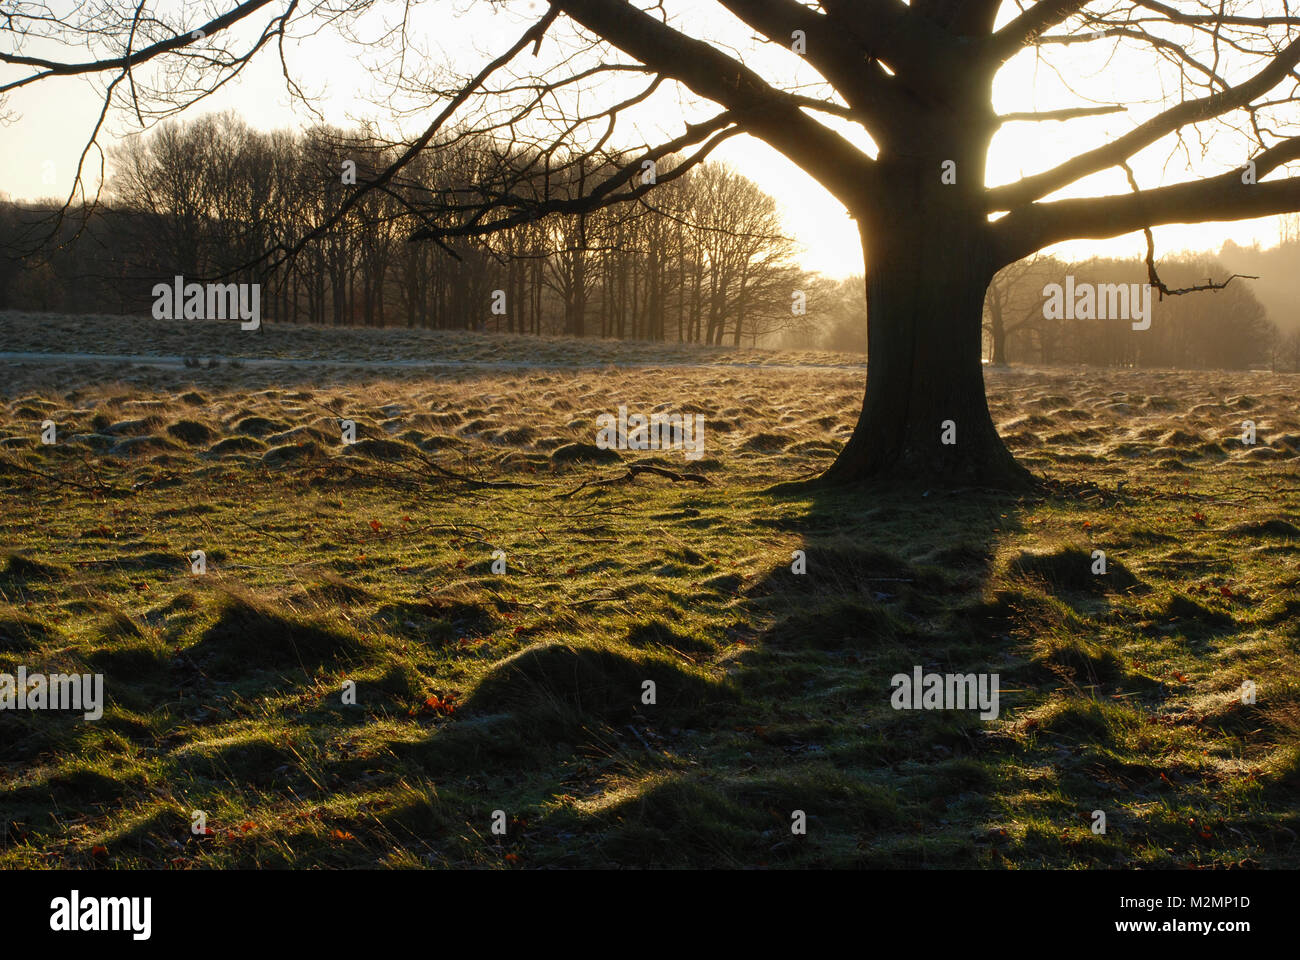 Early morning landscape at Petworth Park in West Sussex, UK. A beautiful sunny but frosty winter day in the English countryside. Stock Photo